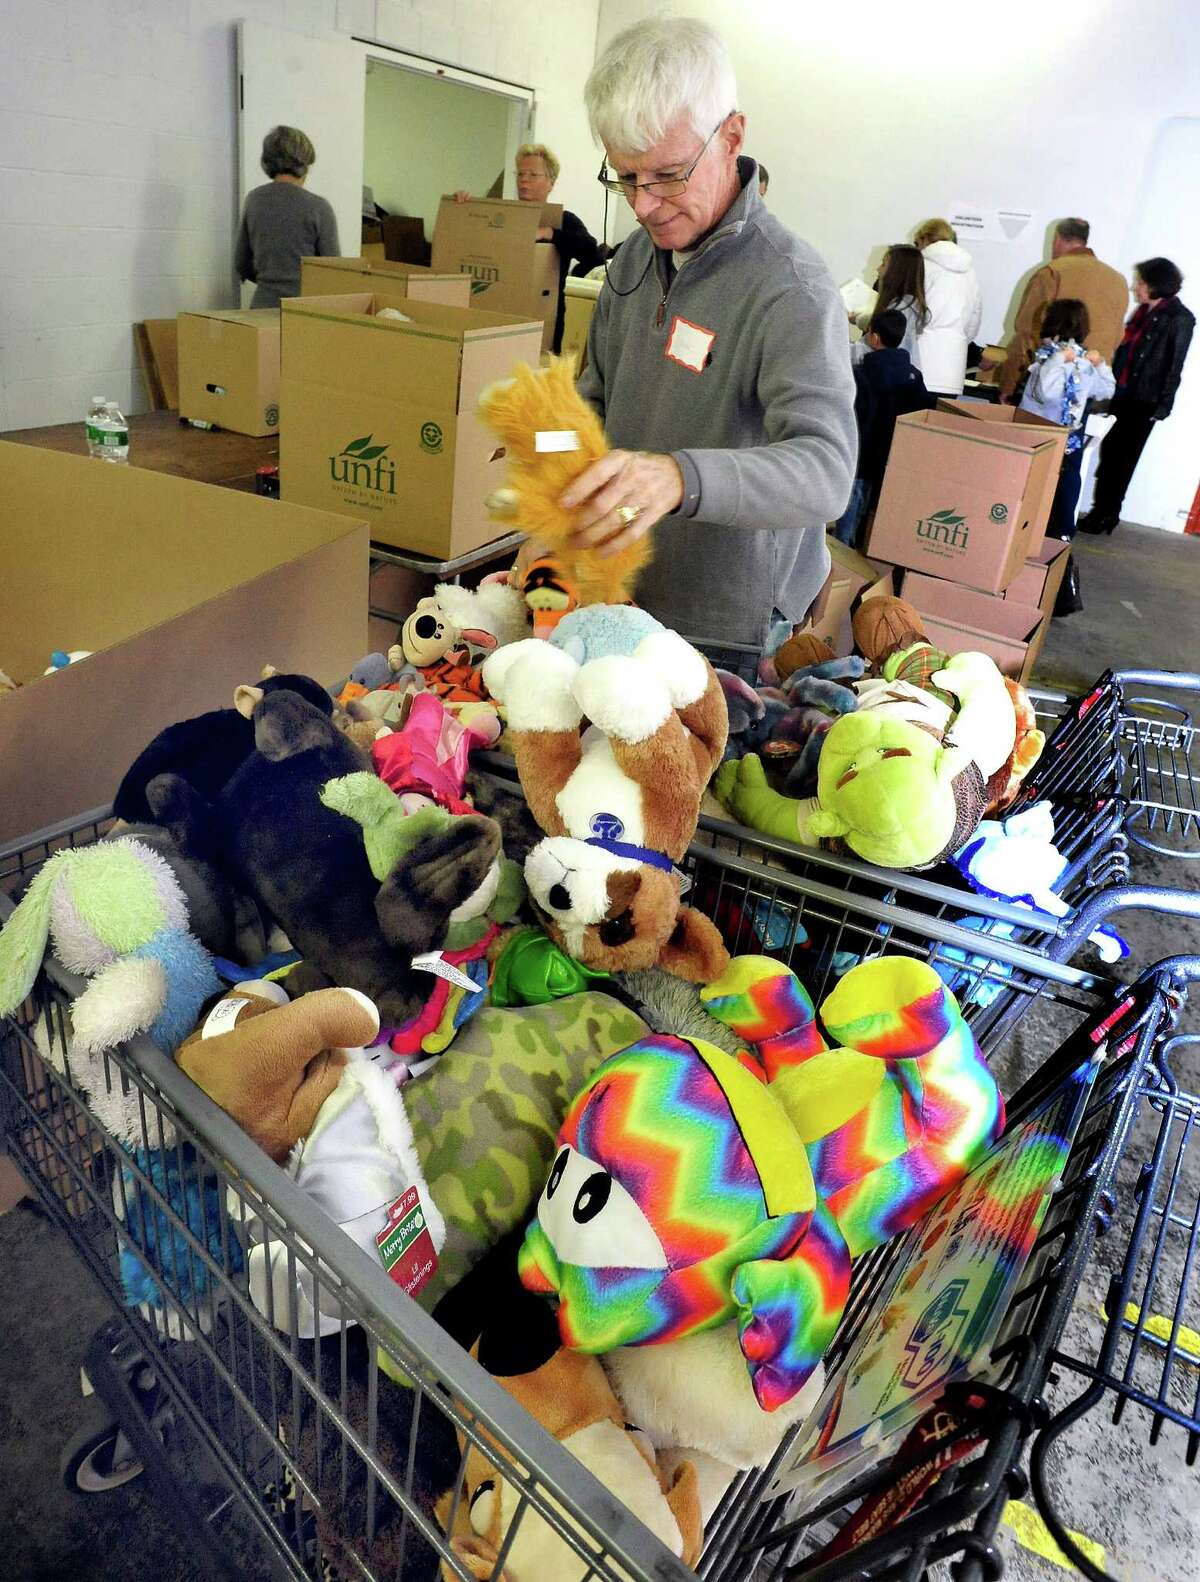 Volunteers, including Frank Gardner, sort donated stuffed animals in a Simms Lane warehouse in Newtown Thursday, Dec. 27, 2012.